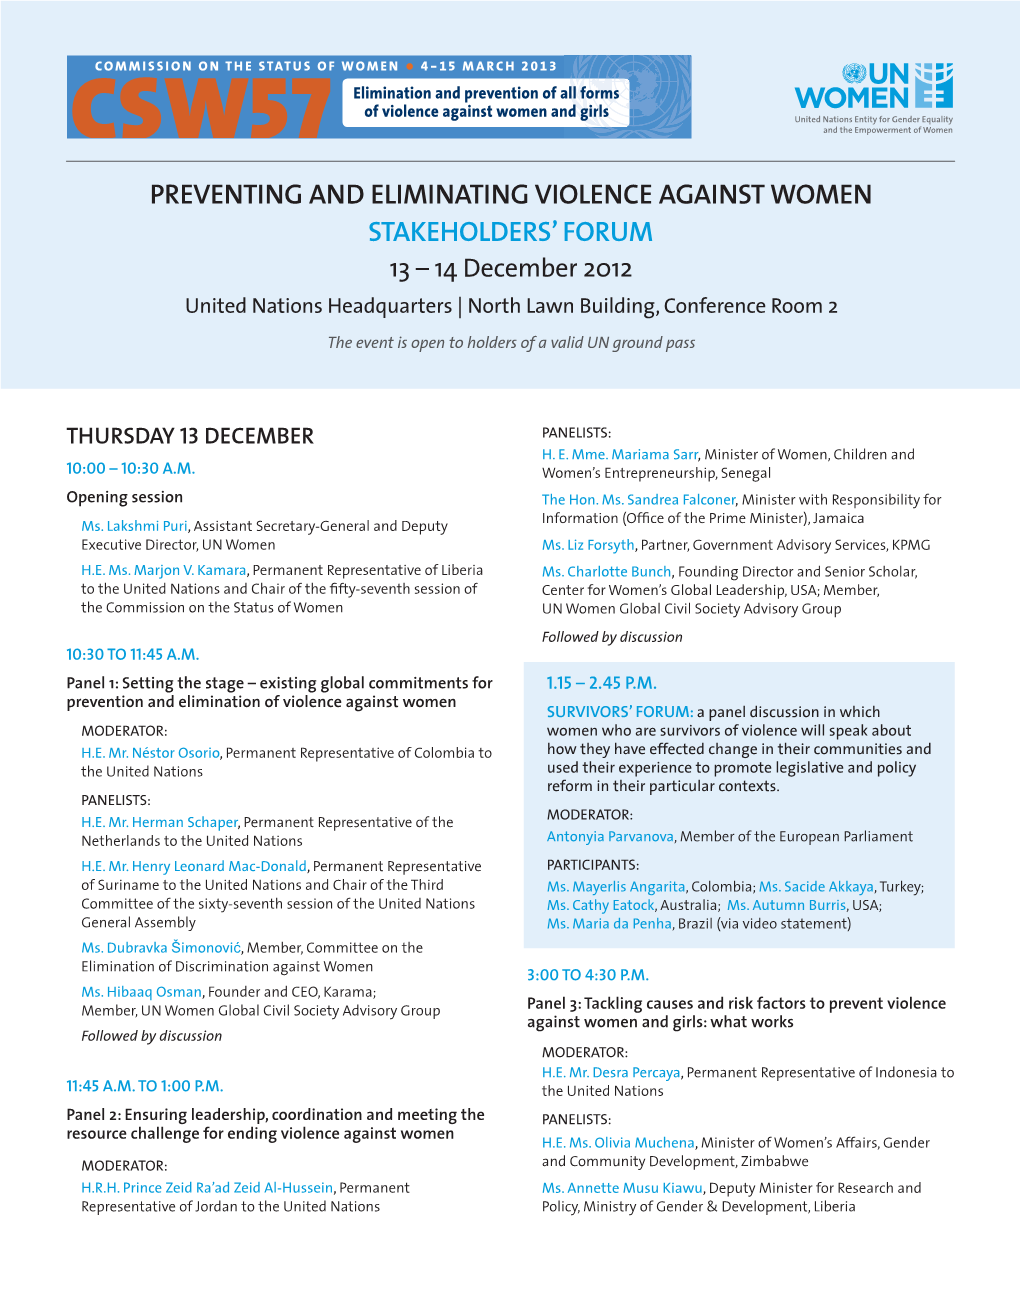 Preventing and Eliminating Violence Against Women Stakeholders' Forum